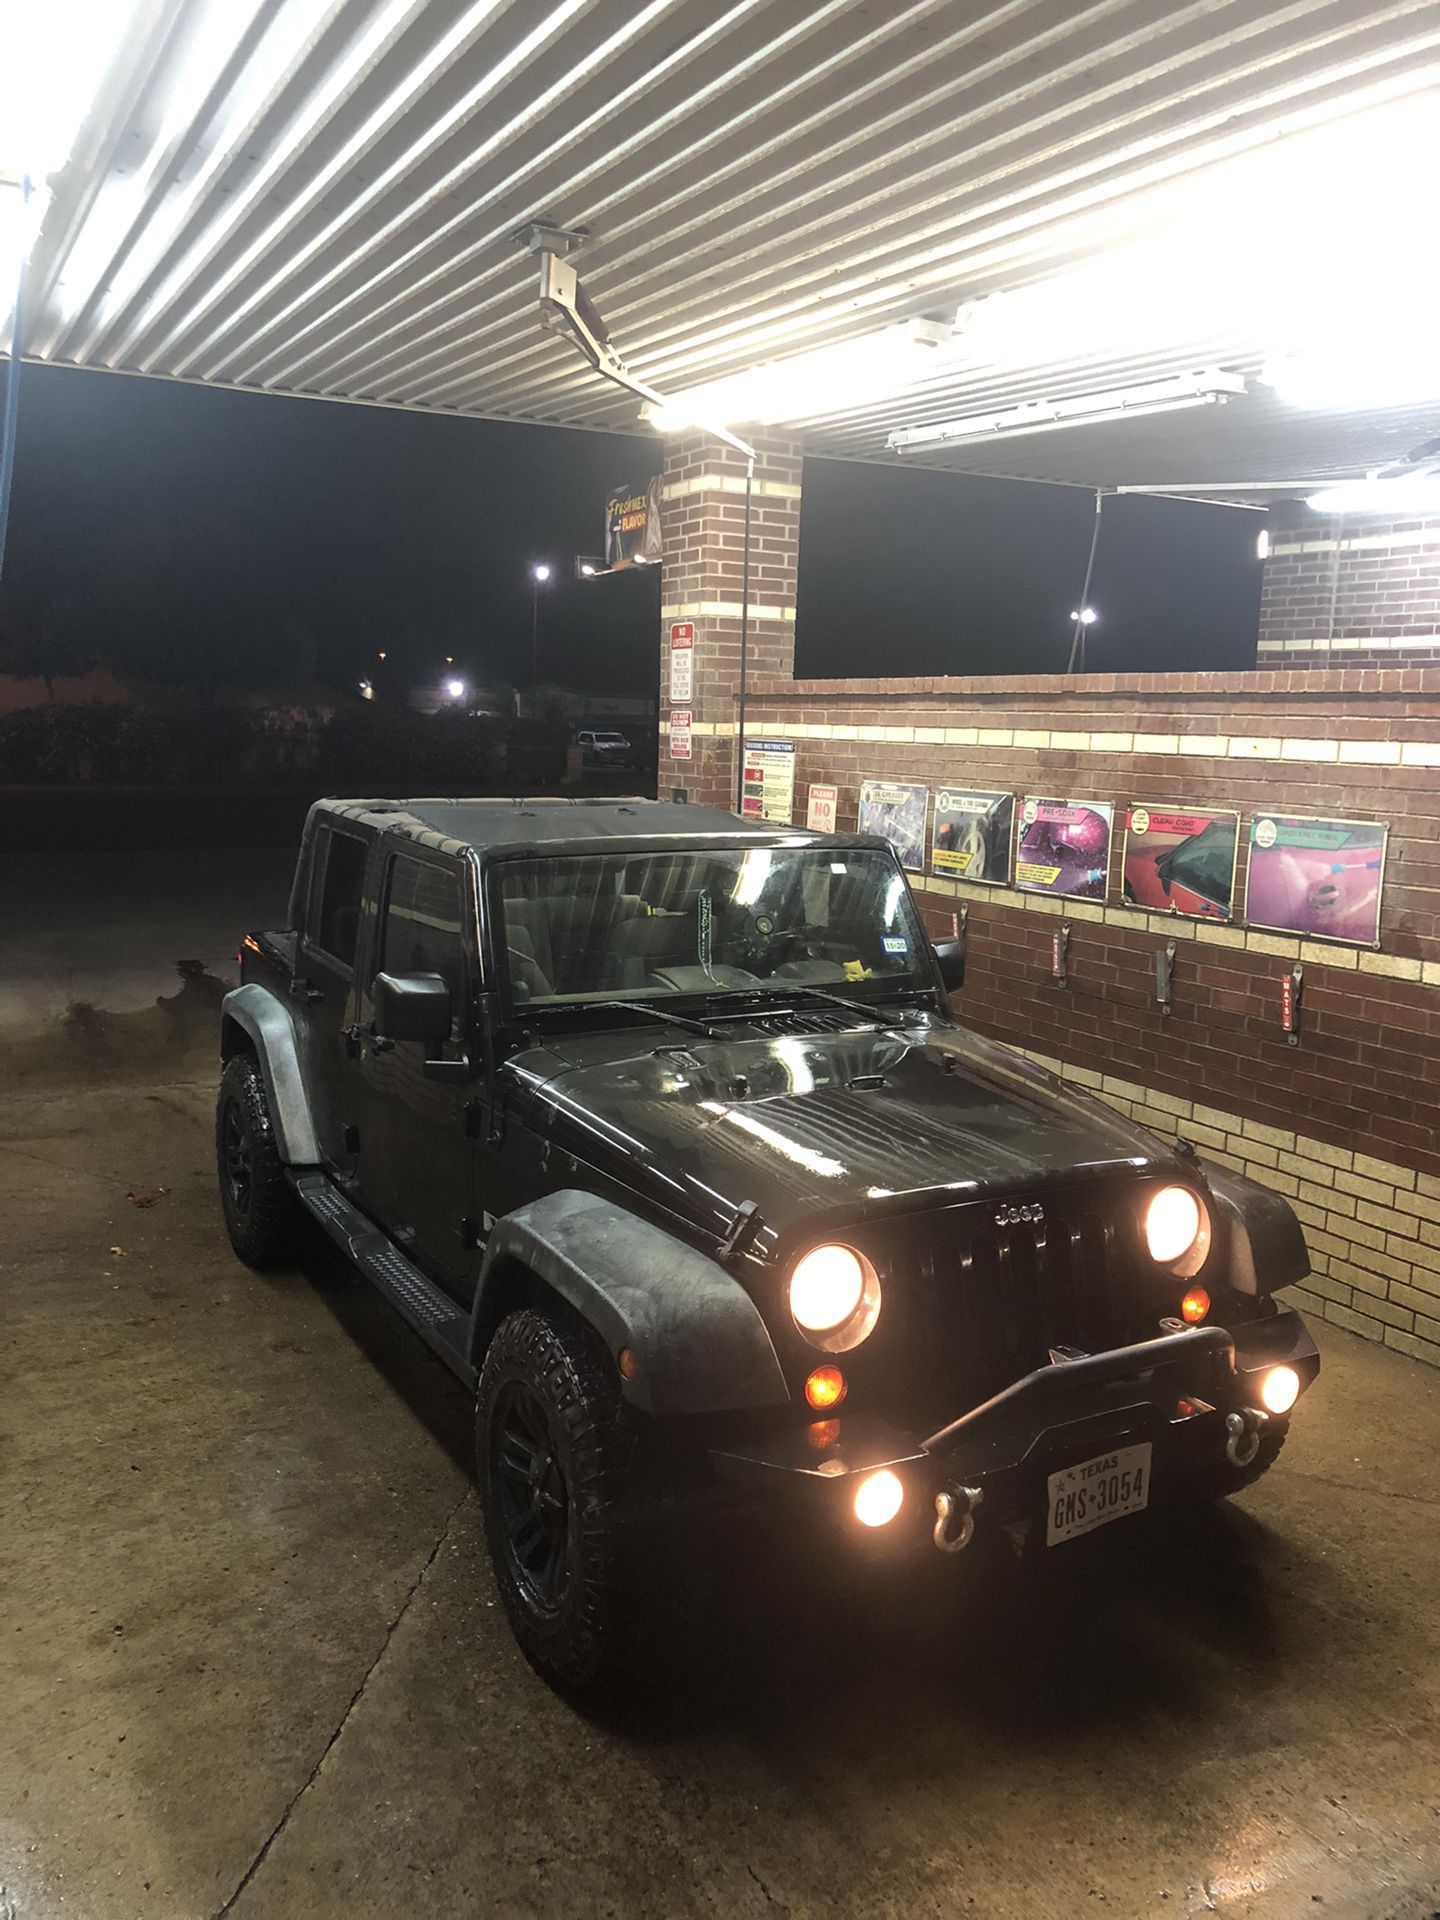 2010 Jeep Wrangler  Reduced $2000 Now Only 13,500 Firm …New Paint job ; And Bigger tires 